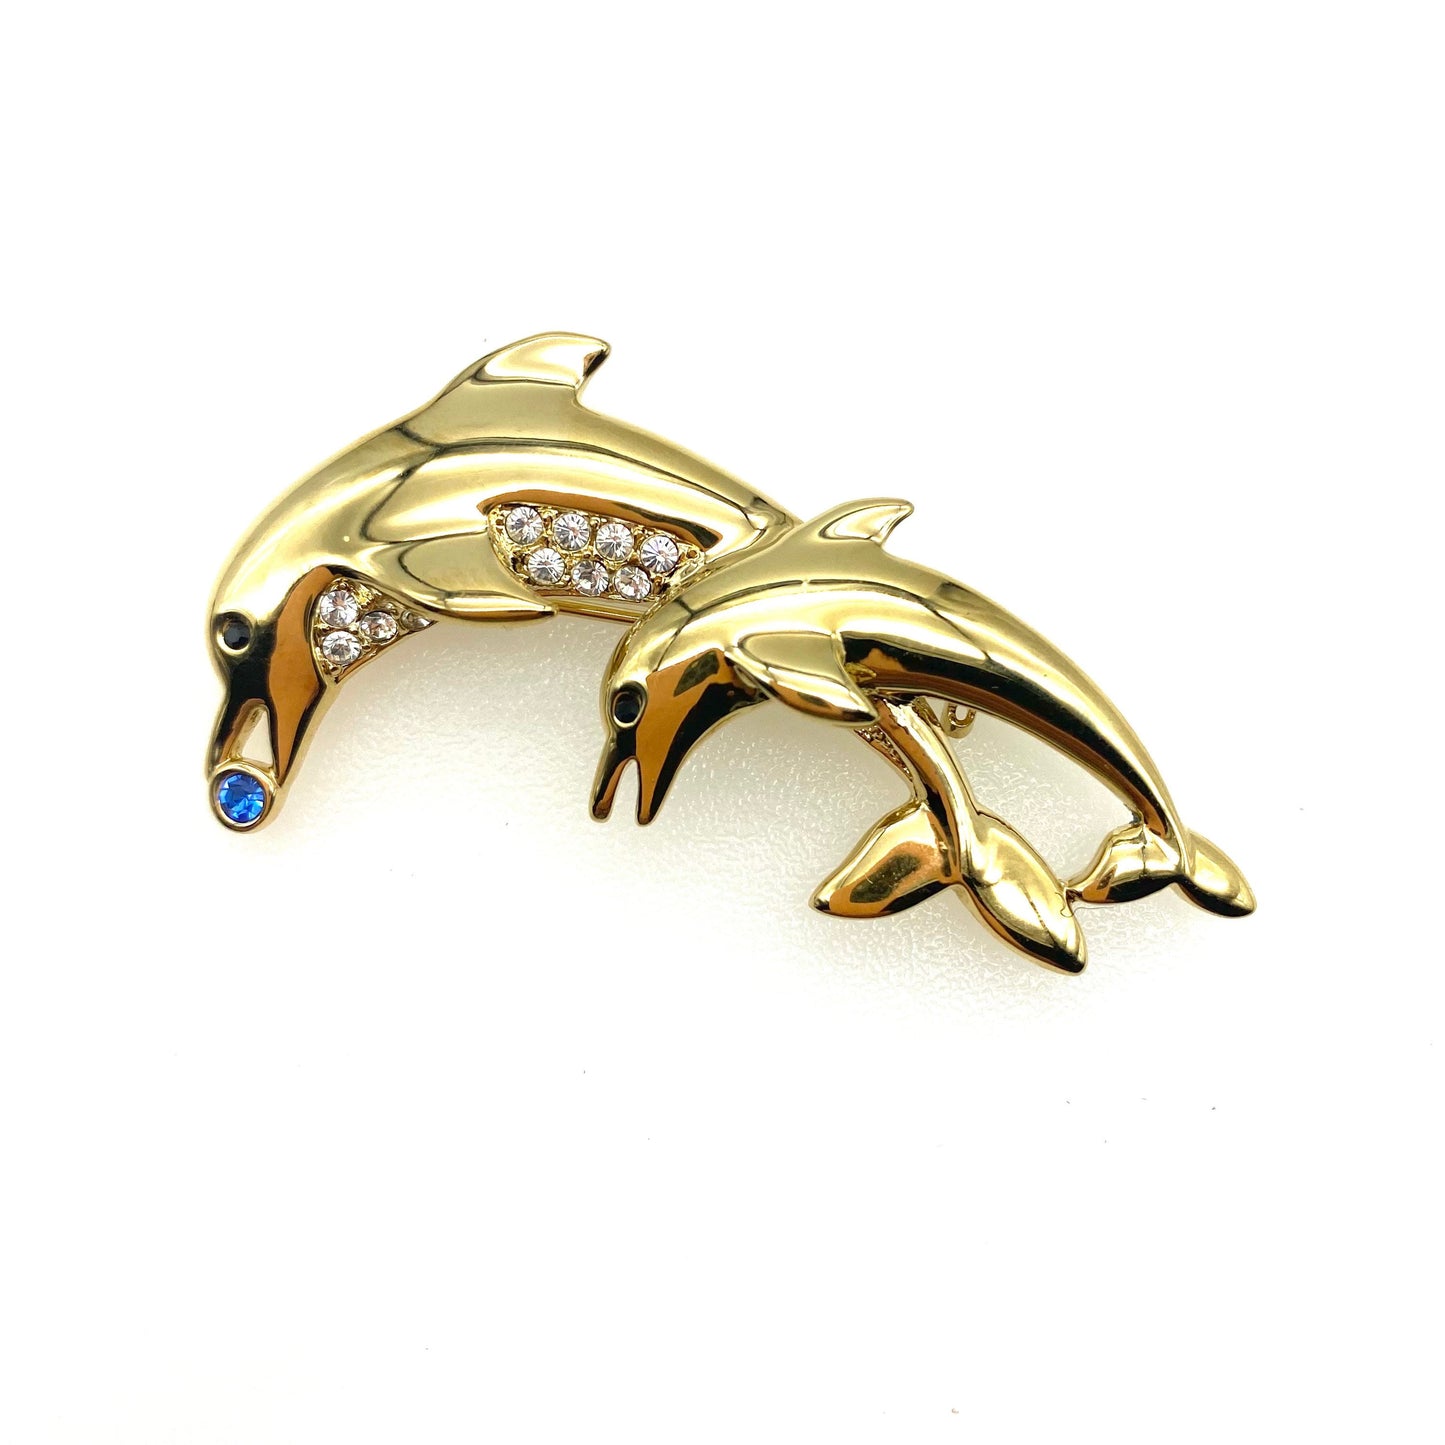 BJ 'Beatrix Jewelry' Leaping Dolphins (Mother and Calf) Brooch